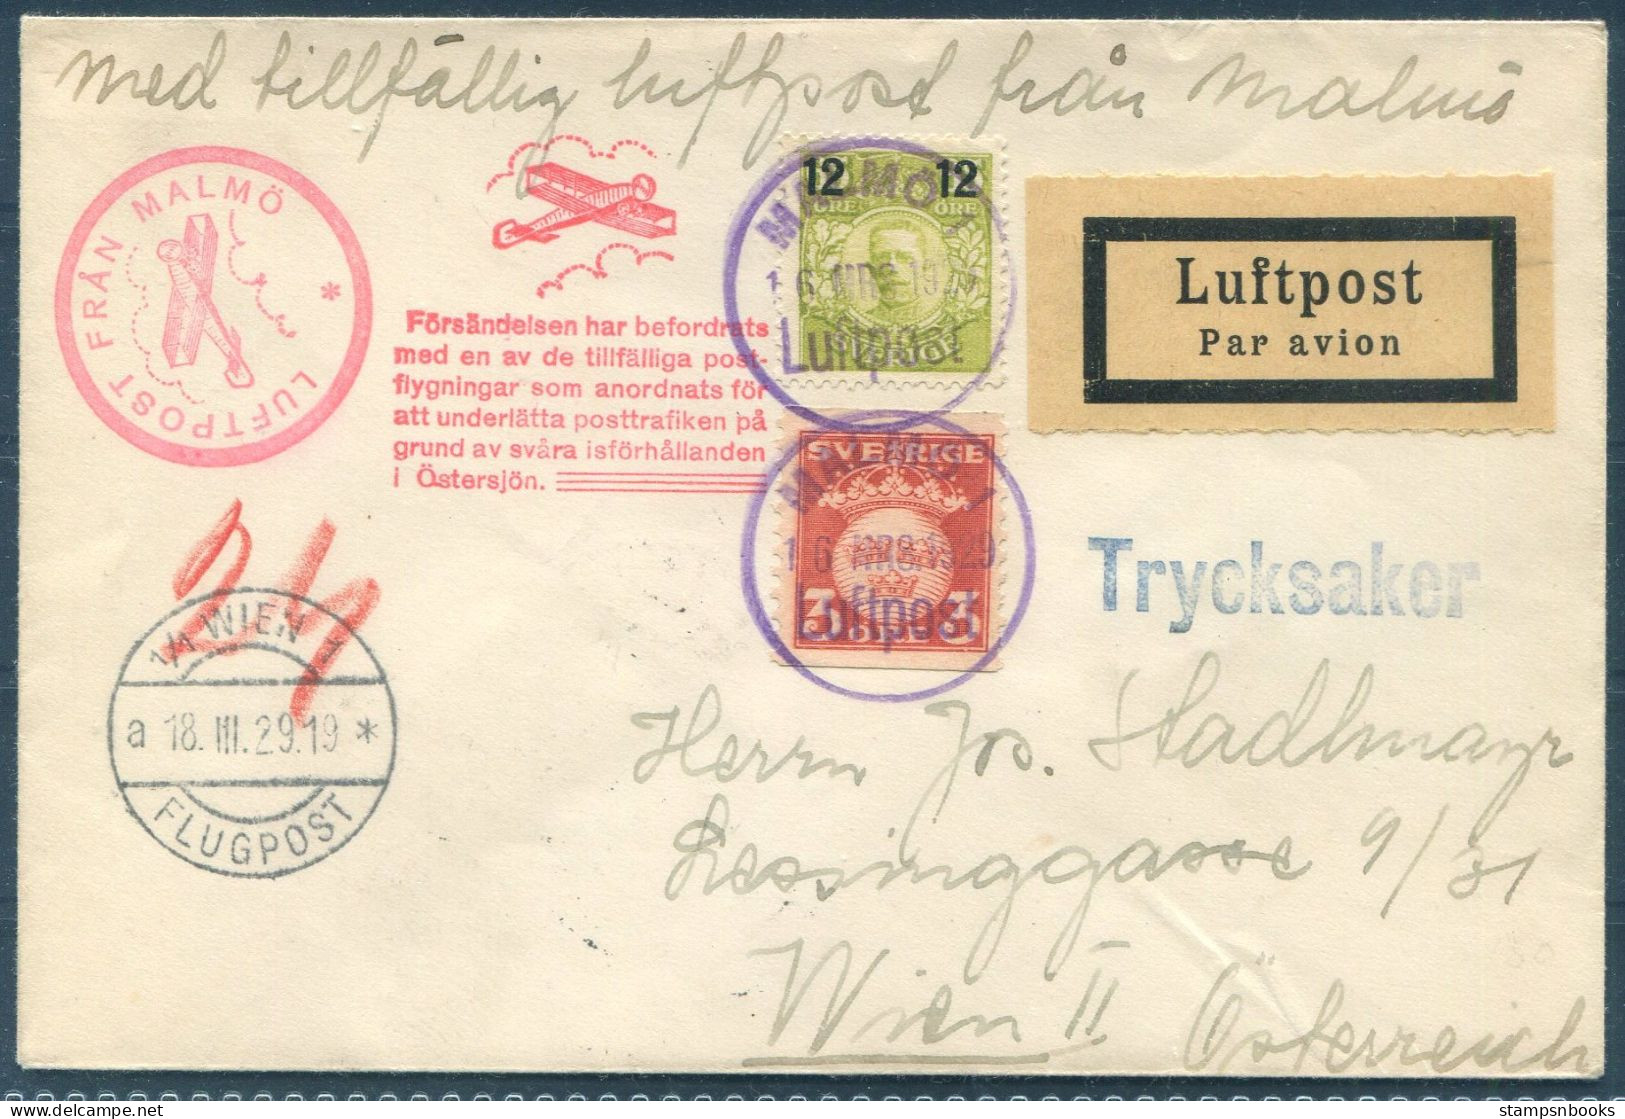 1929 Sweden Malmo - Wien Austria Icemail Airmail Luftpost Flight Cover - Covers & Documents